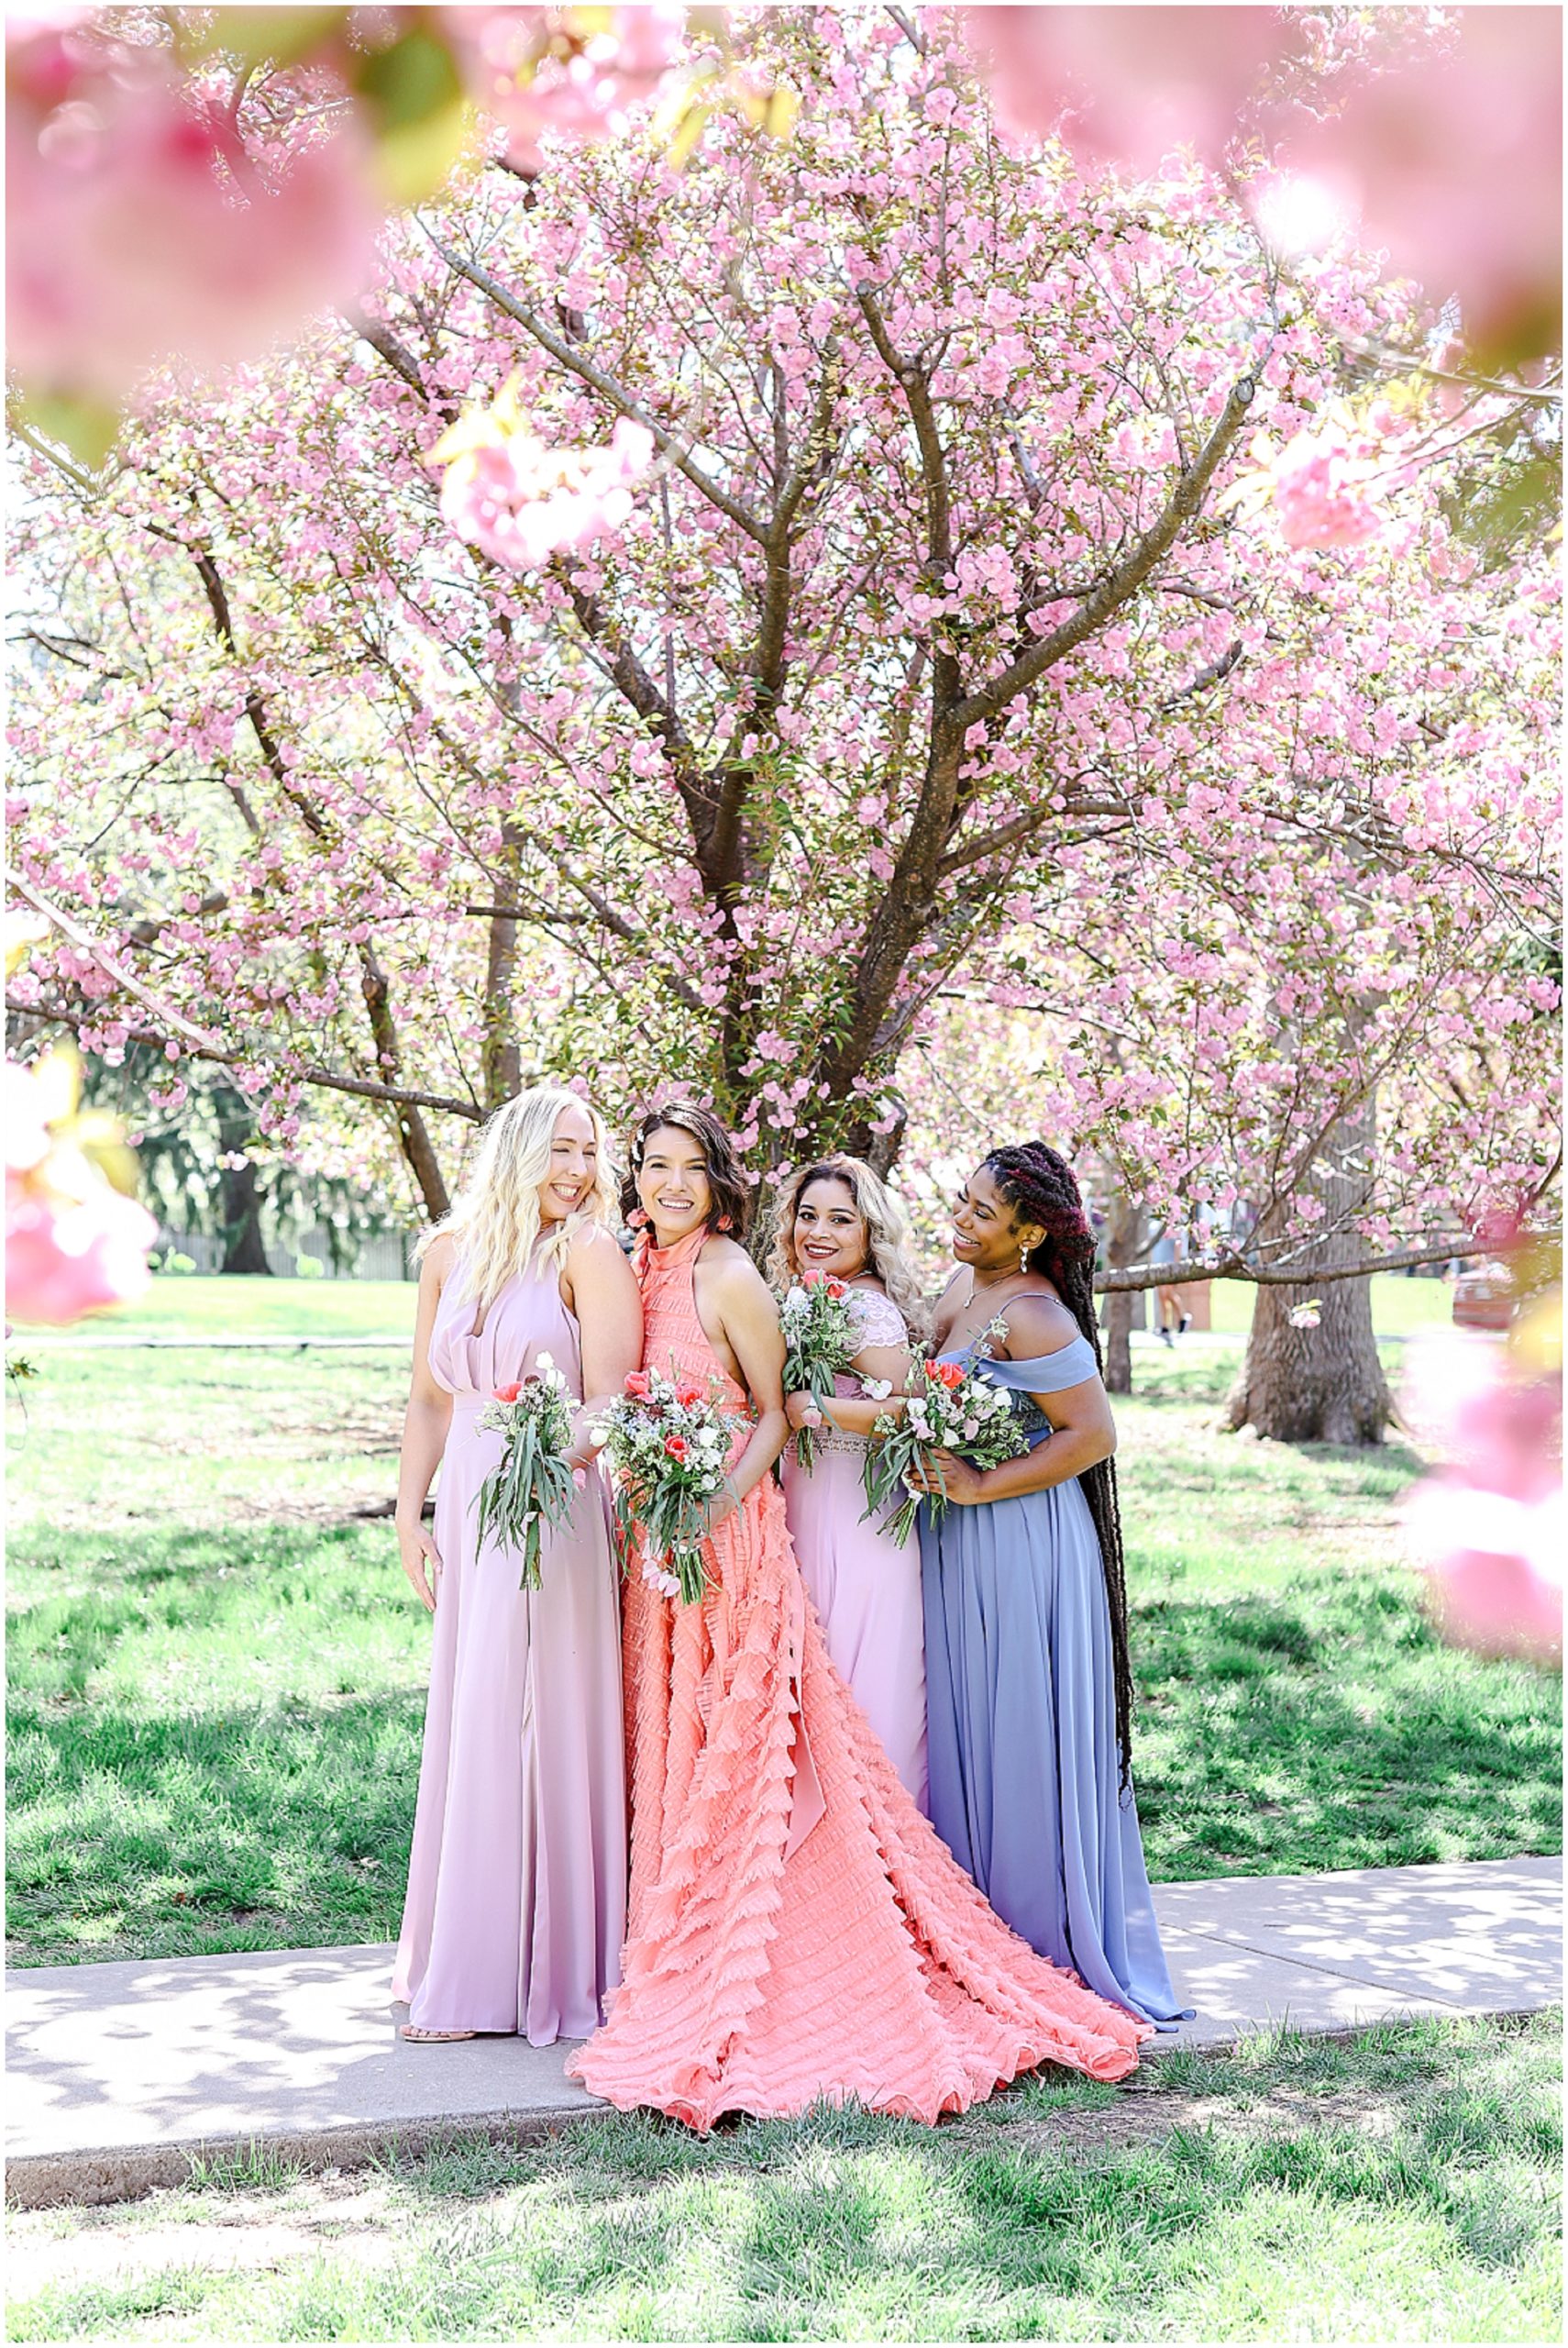 pink wedding dress and beautiful pink trees and kansas city loose park wedding with pretty bridal party photos 